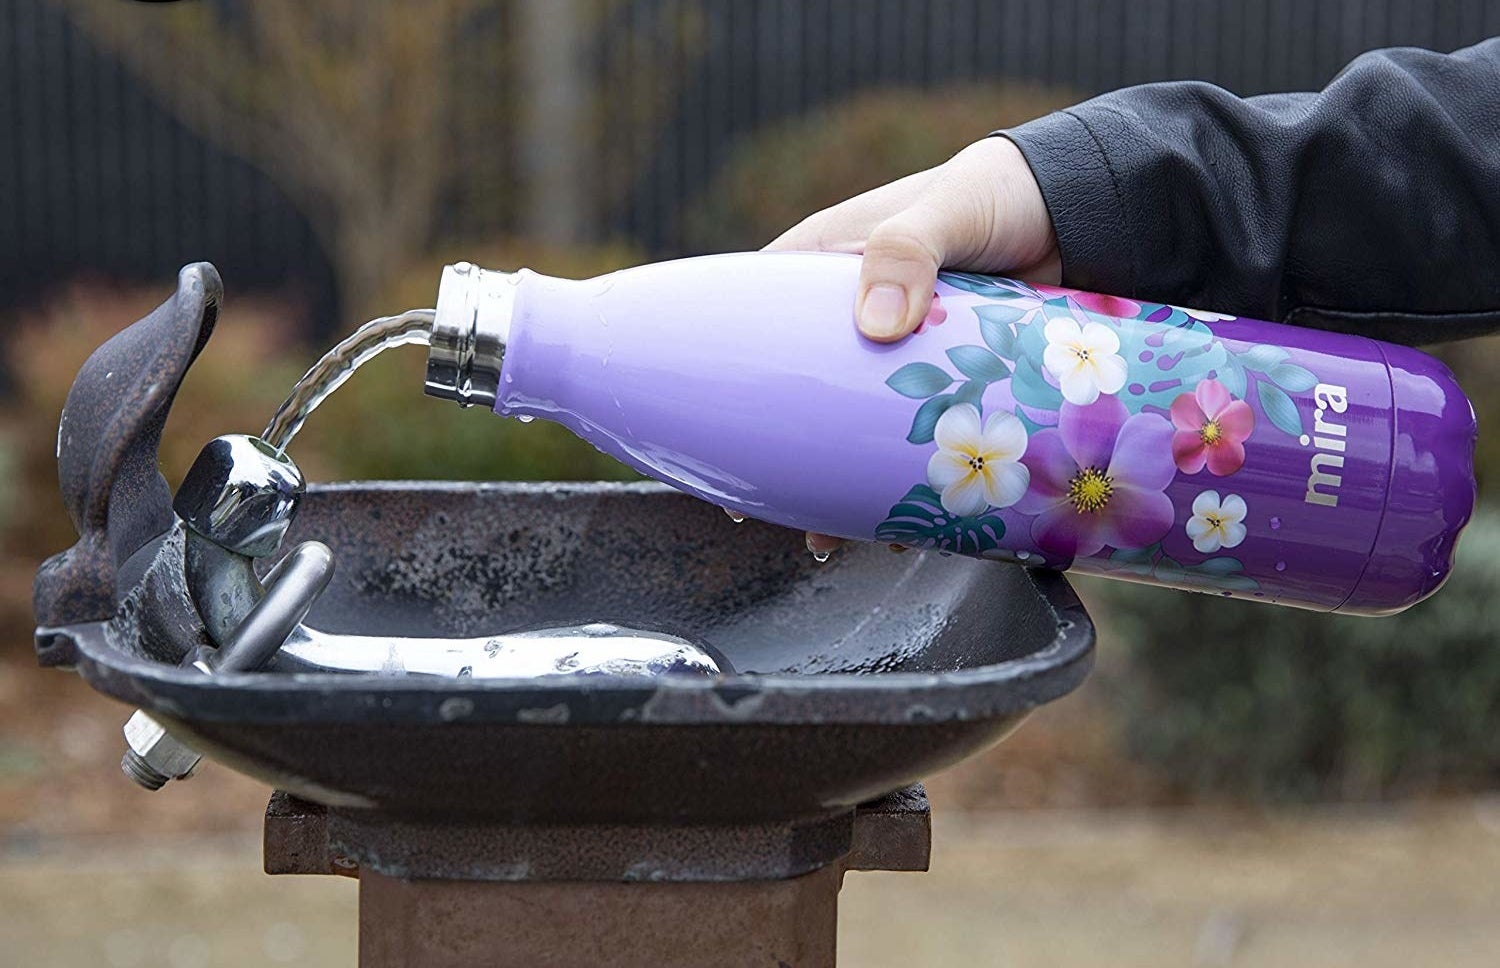 A hand refills a purple, narrow-necked stainless steel bottle (with purple, pink, and white flowers and green foliage print) at a water fountain